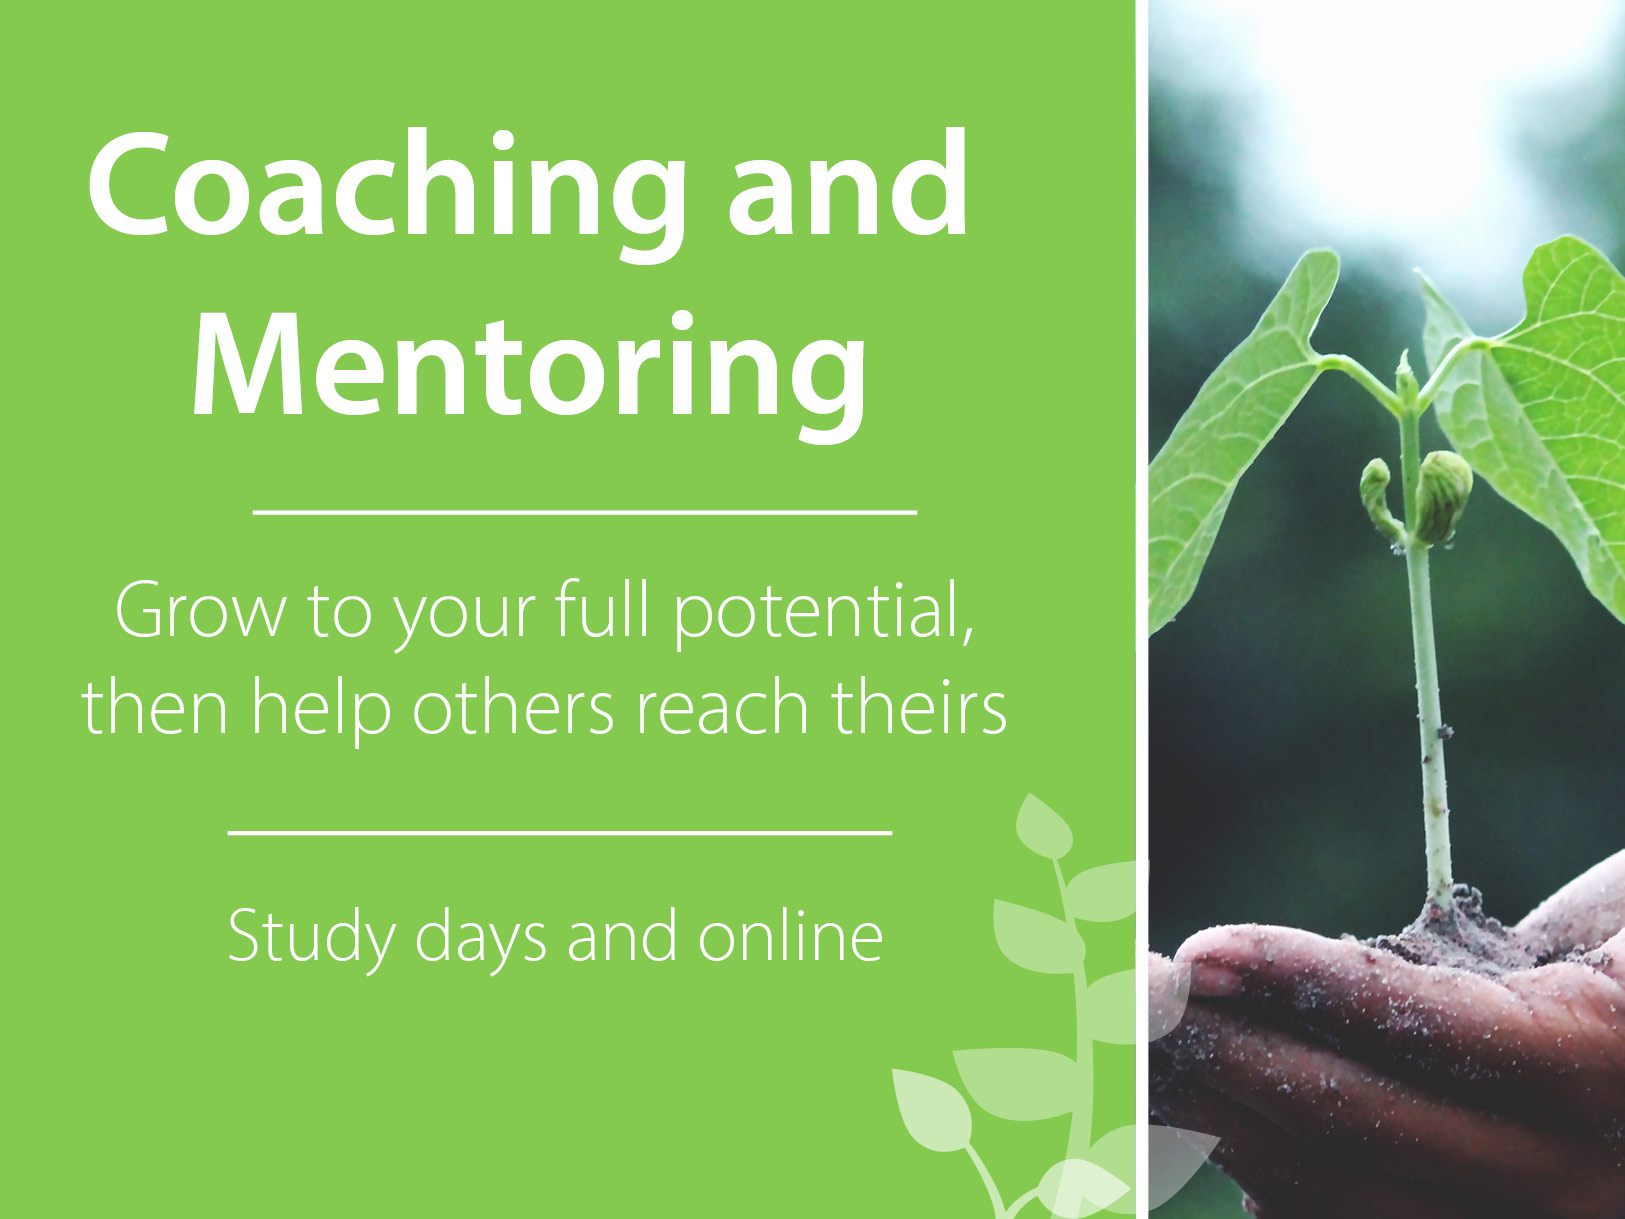 Gain practical skills to help coach and mentor others